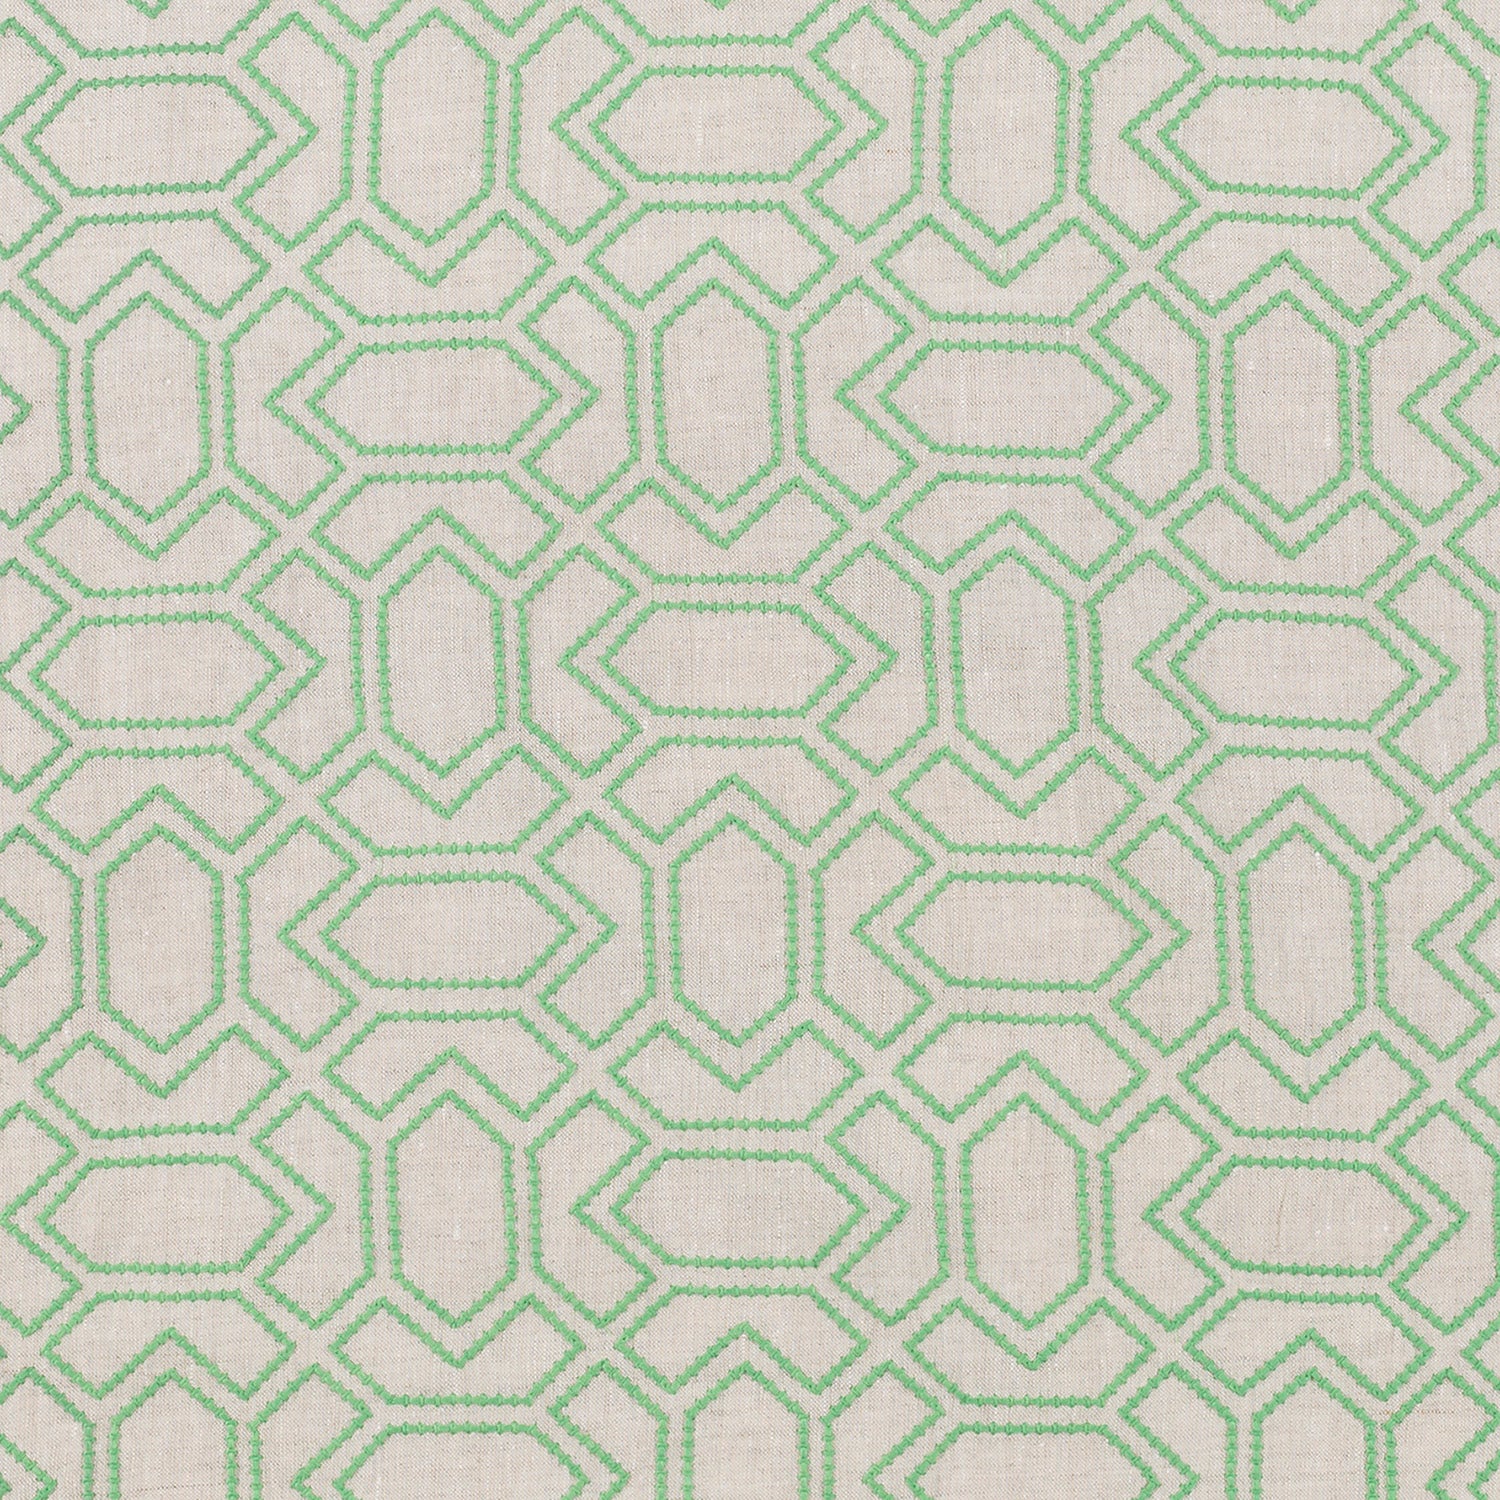 Fabric with an embroidered geometric grid print in light green on a light gray field.